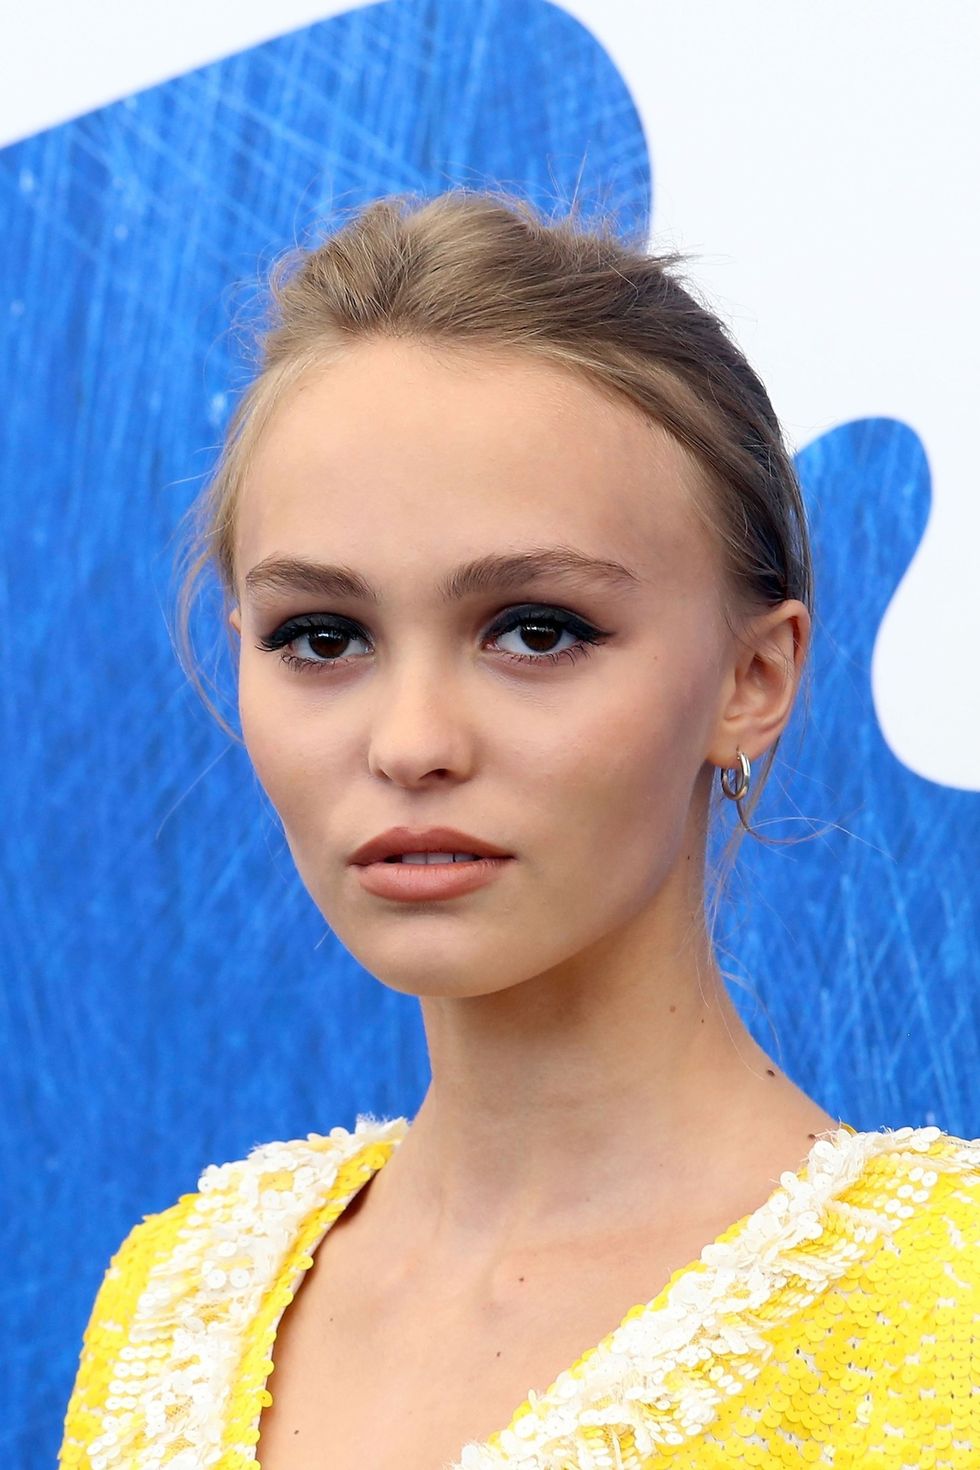 <p>L'eyeliner sixties di <a href="http://www.elle.com/it/bellezza/profumi/news/a935/lily-rose-chanel-testimonial-profumo/">Lily-Rose Depp</a> (make up Chanel).</p>